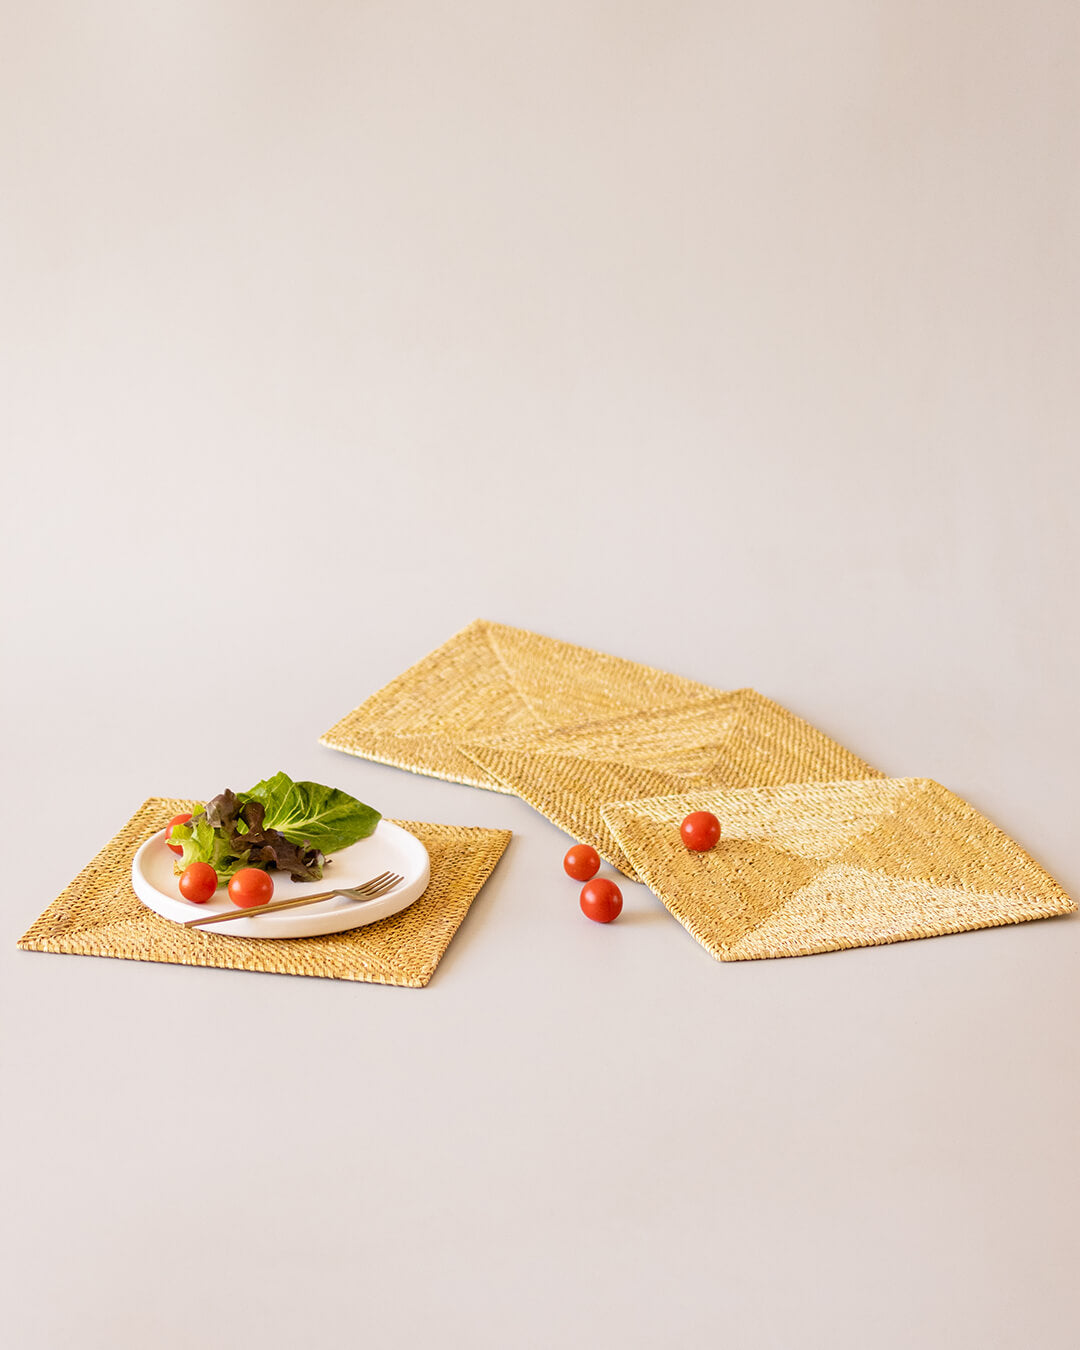 Unique handmade placemats for tabletops